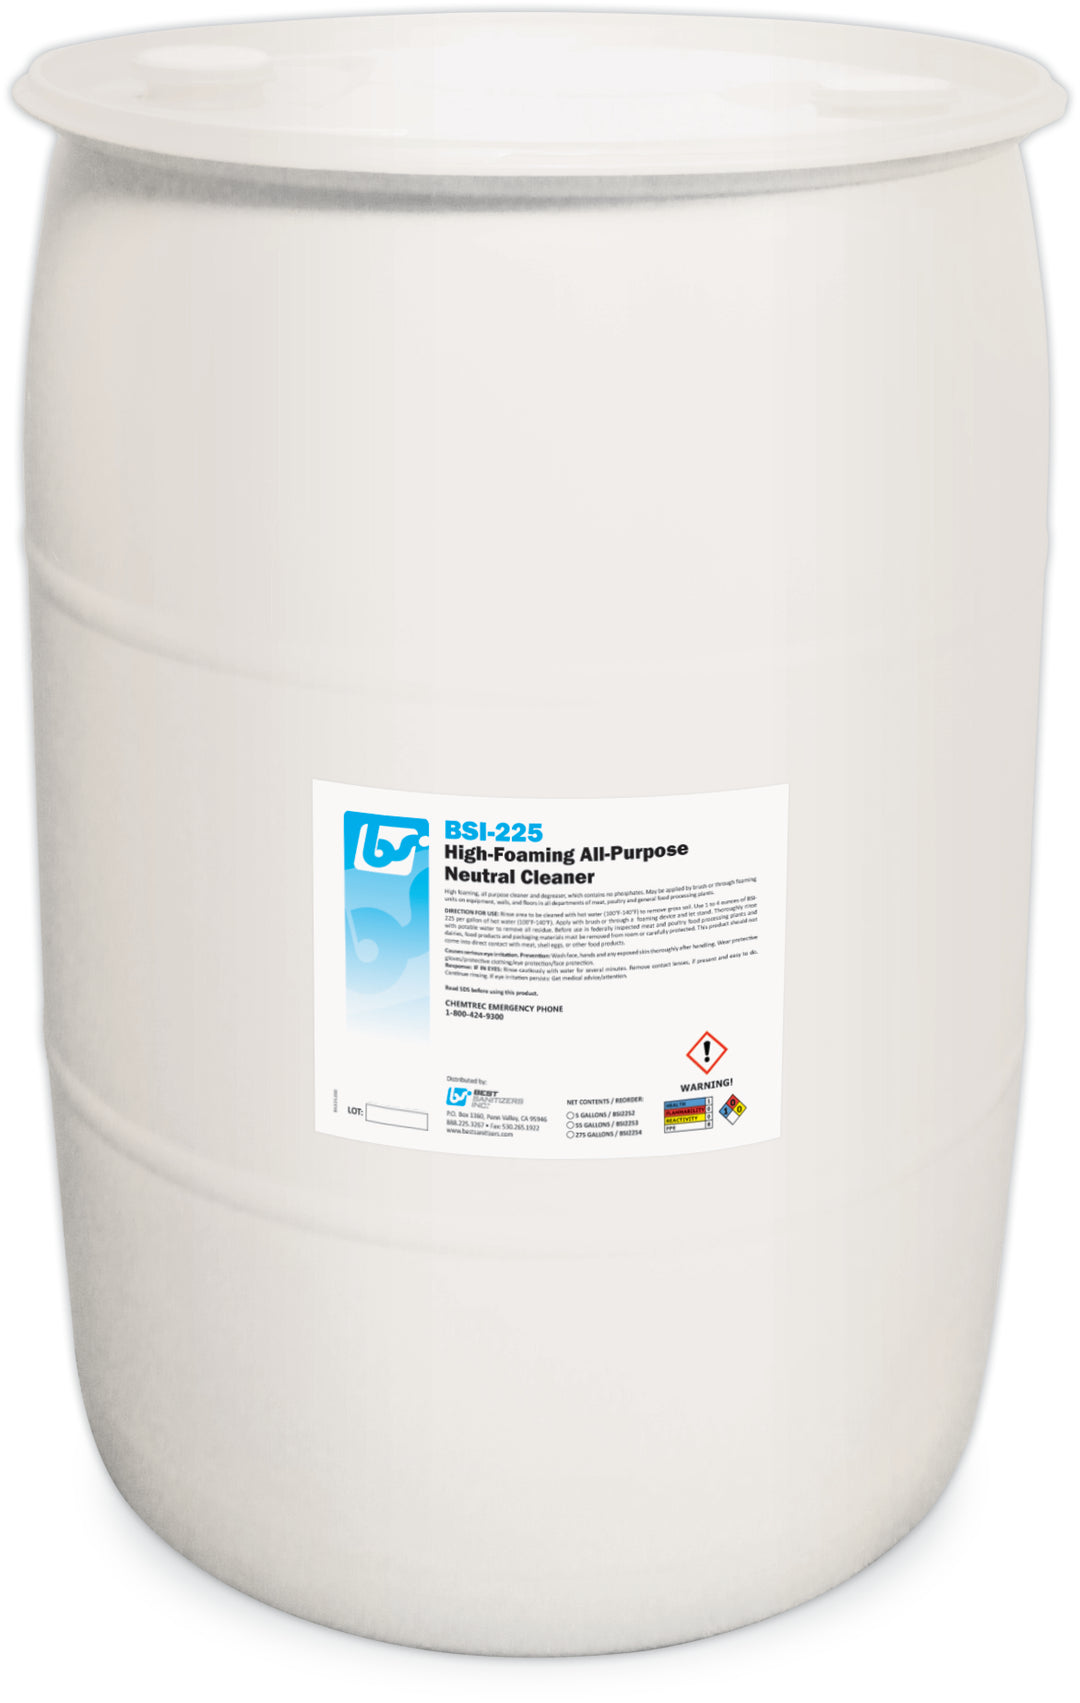 A 55 Gallon Drum of BSI-225 High-Foaming All-Purpose Neutral Cleaner.